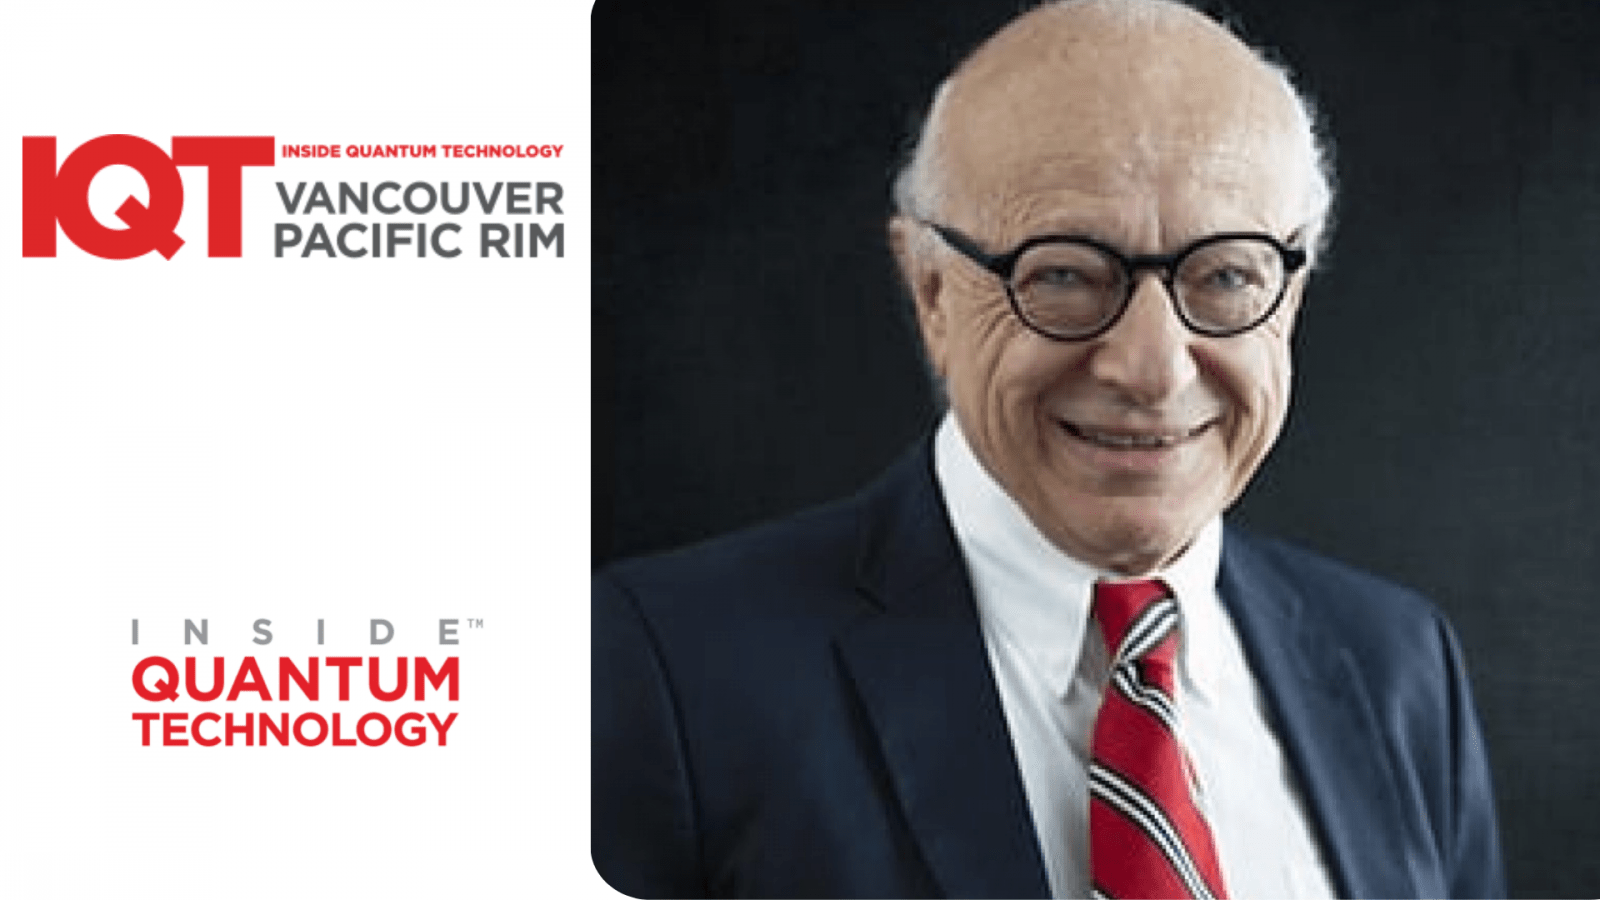 Lawrence Gasman, co-founder of Inside Quantum Technology (IQT) is a 2024 Speaker at the IQT Vancouver/Pacific Rim Conference